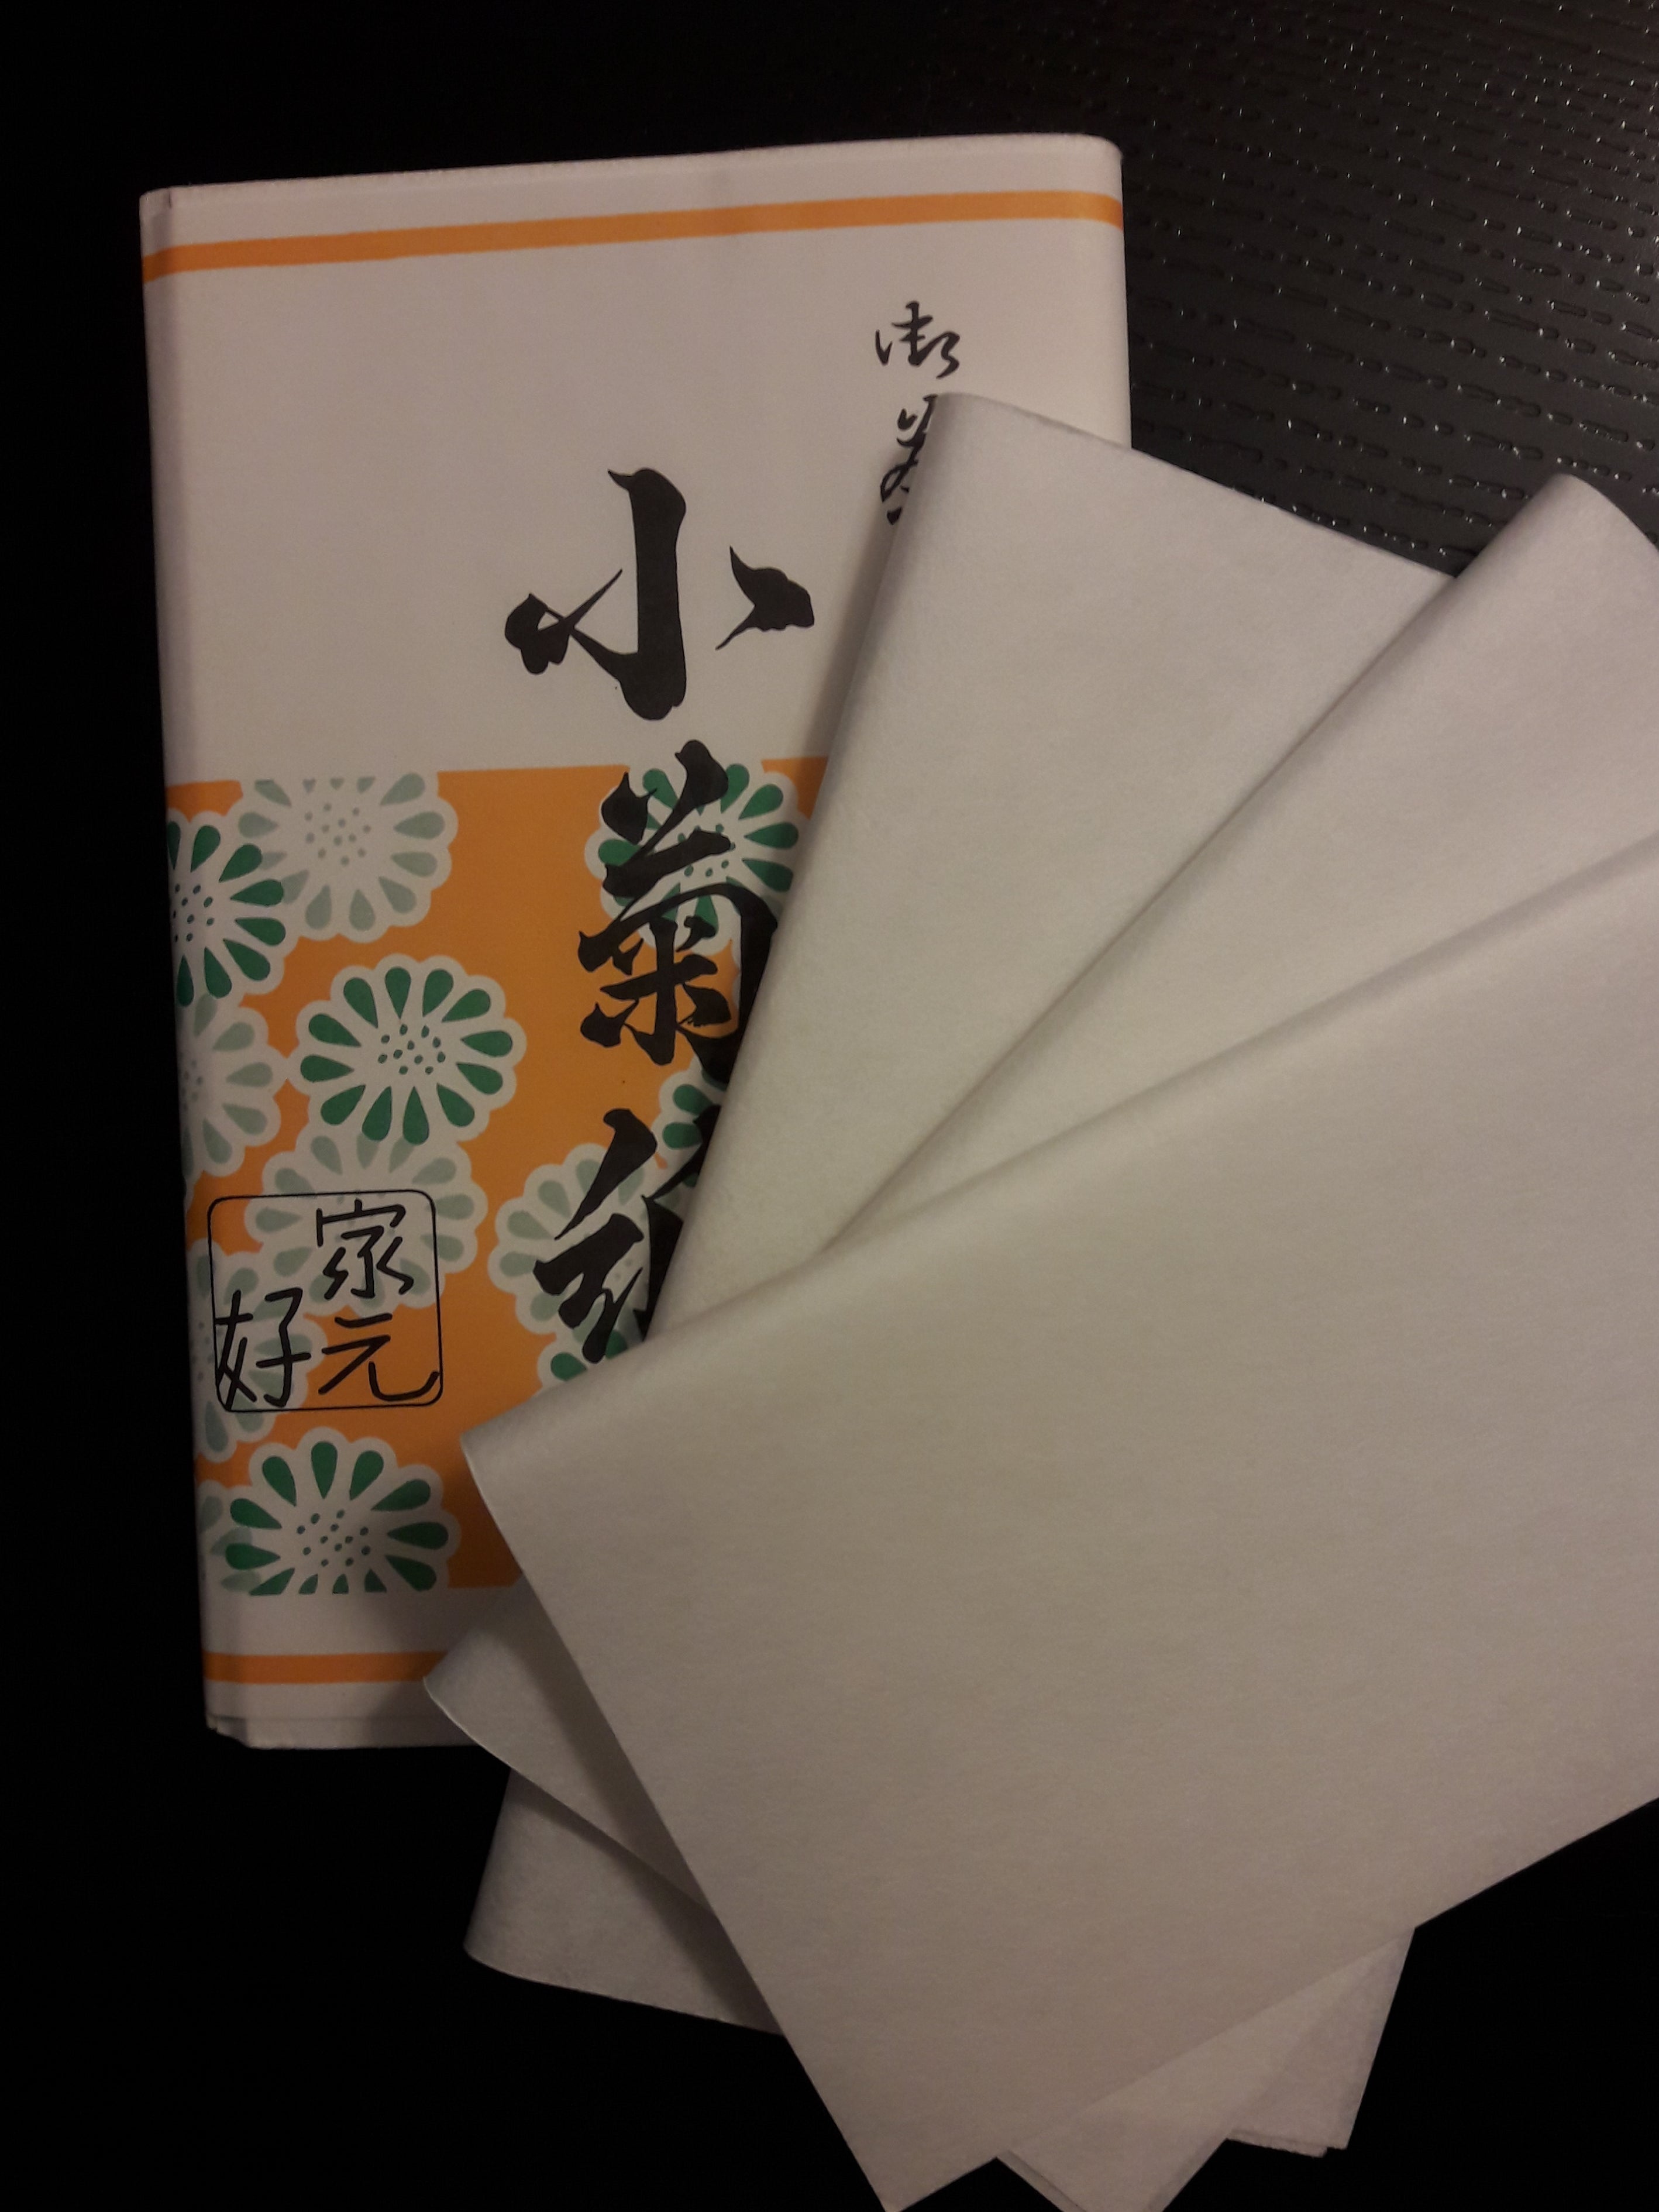 Kogiku Kaishi, Papers for Serving Tea Sweets, pack of 30. 14.5x17.5cm (5.625x6.875")